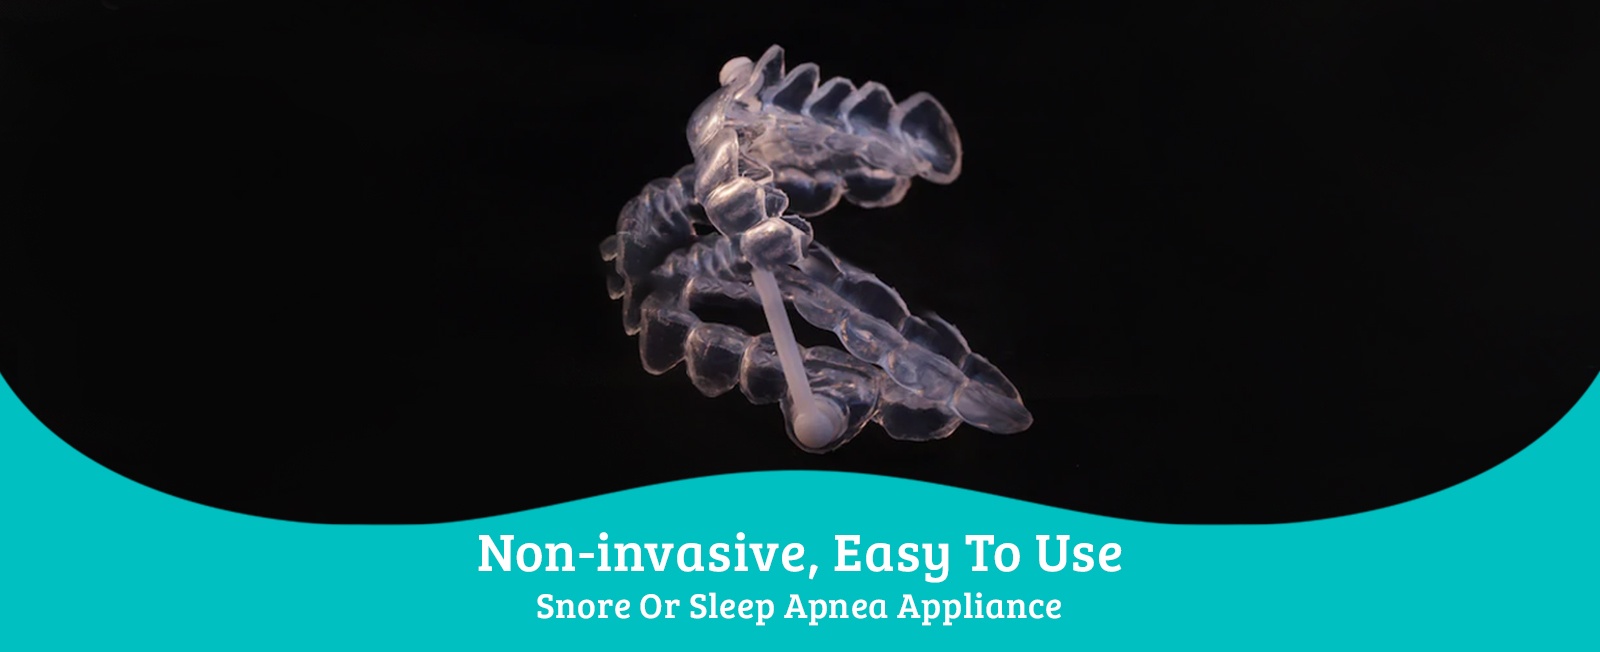 Snore Or Sleep Apnea Appliance Toronto - Dentistry Services by Dentists on Bloor